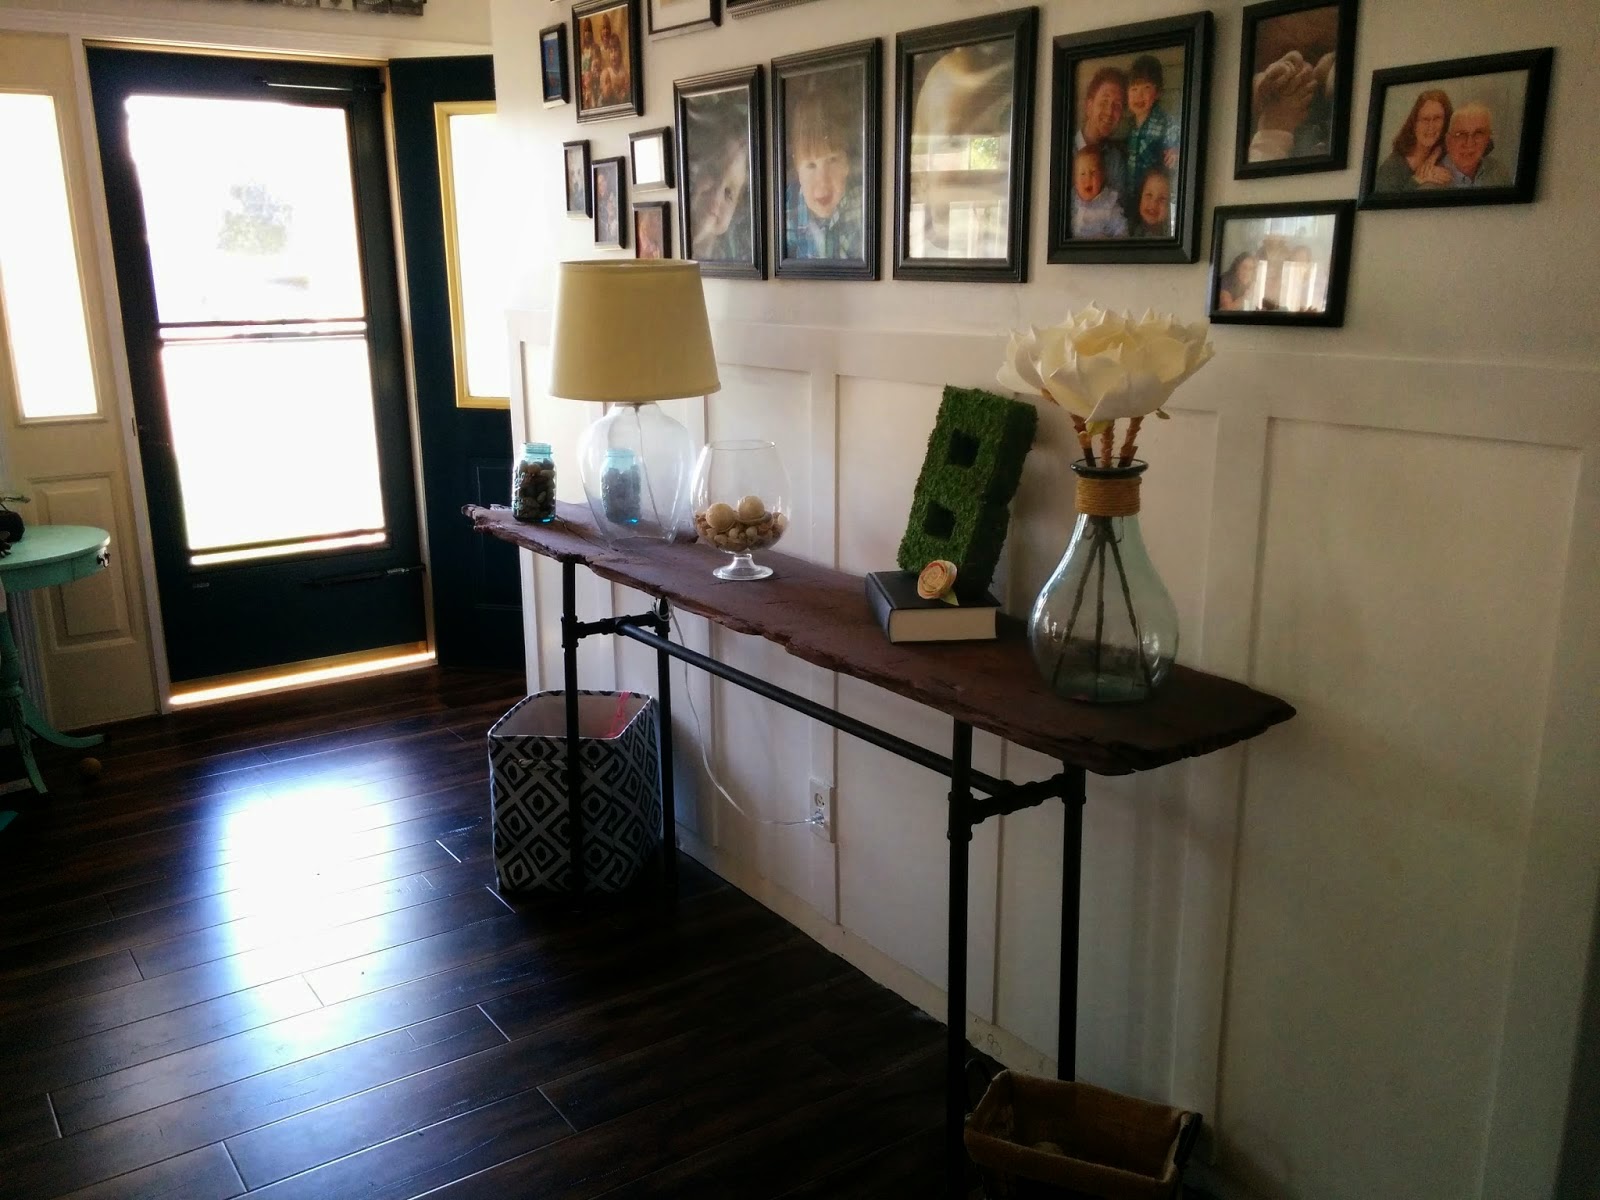 http://www.ourhousenowahome.com/2014/07/diy-industrialrustic-console-table.html